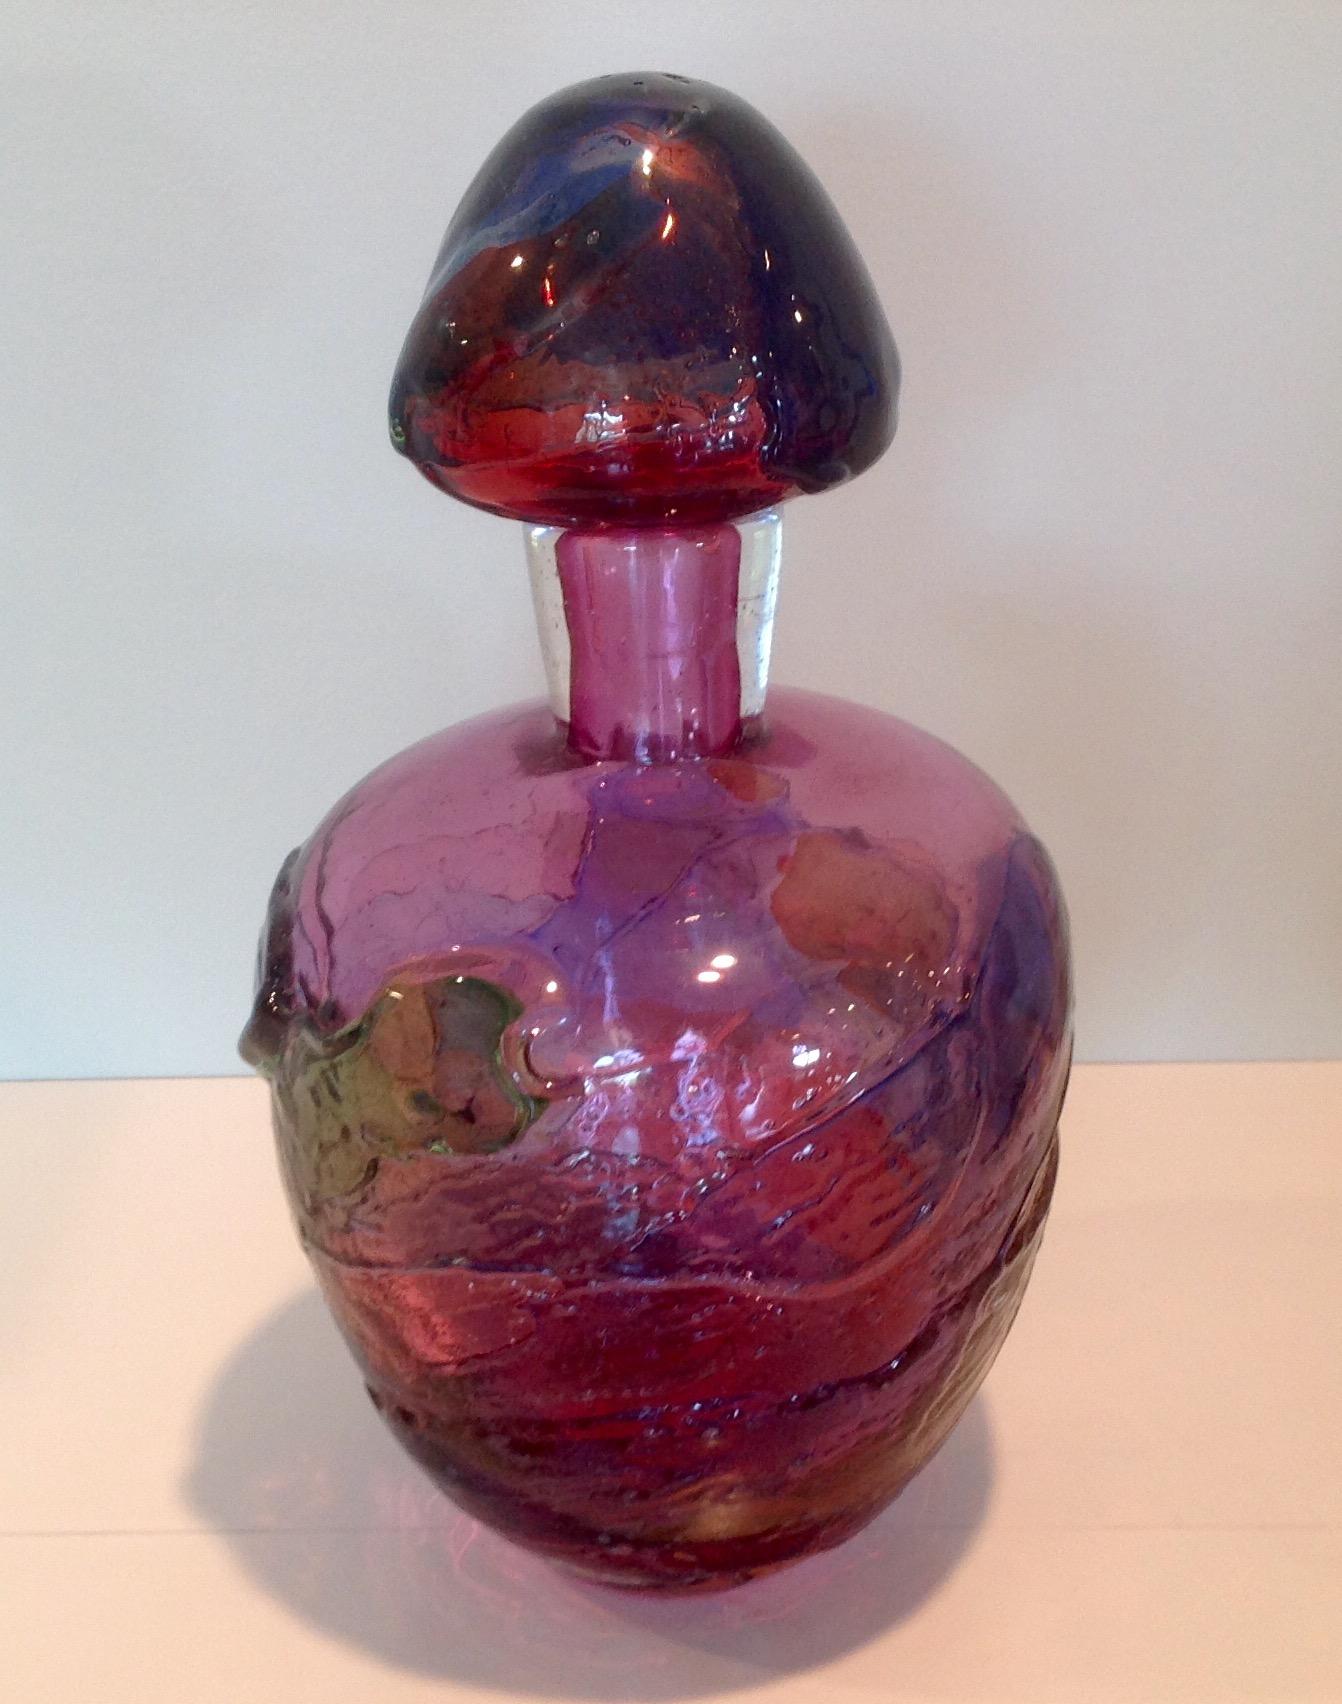 Amazing Mid-Century Modern decanter by Pino Signoretto. Large and solid form with amazing color. 

Pino Signoretto was born in 1944 in a small town near Venice and in 1954 began working at a chandelier glassworks. In 1959 he learned from the great